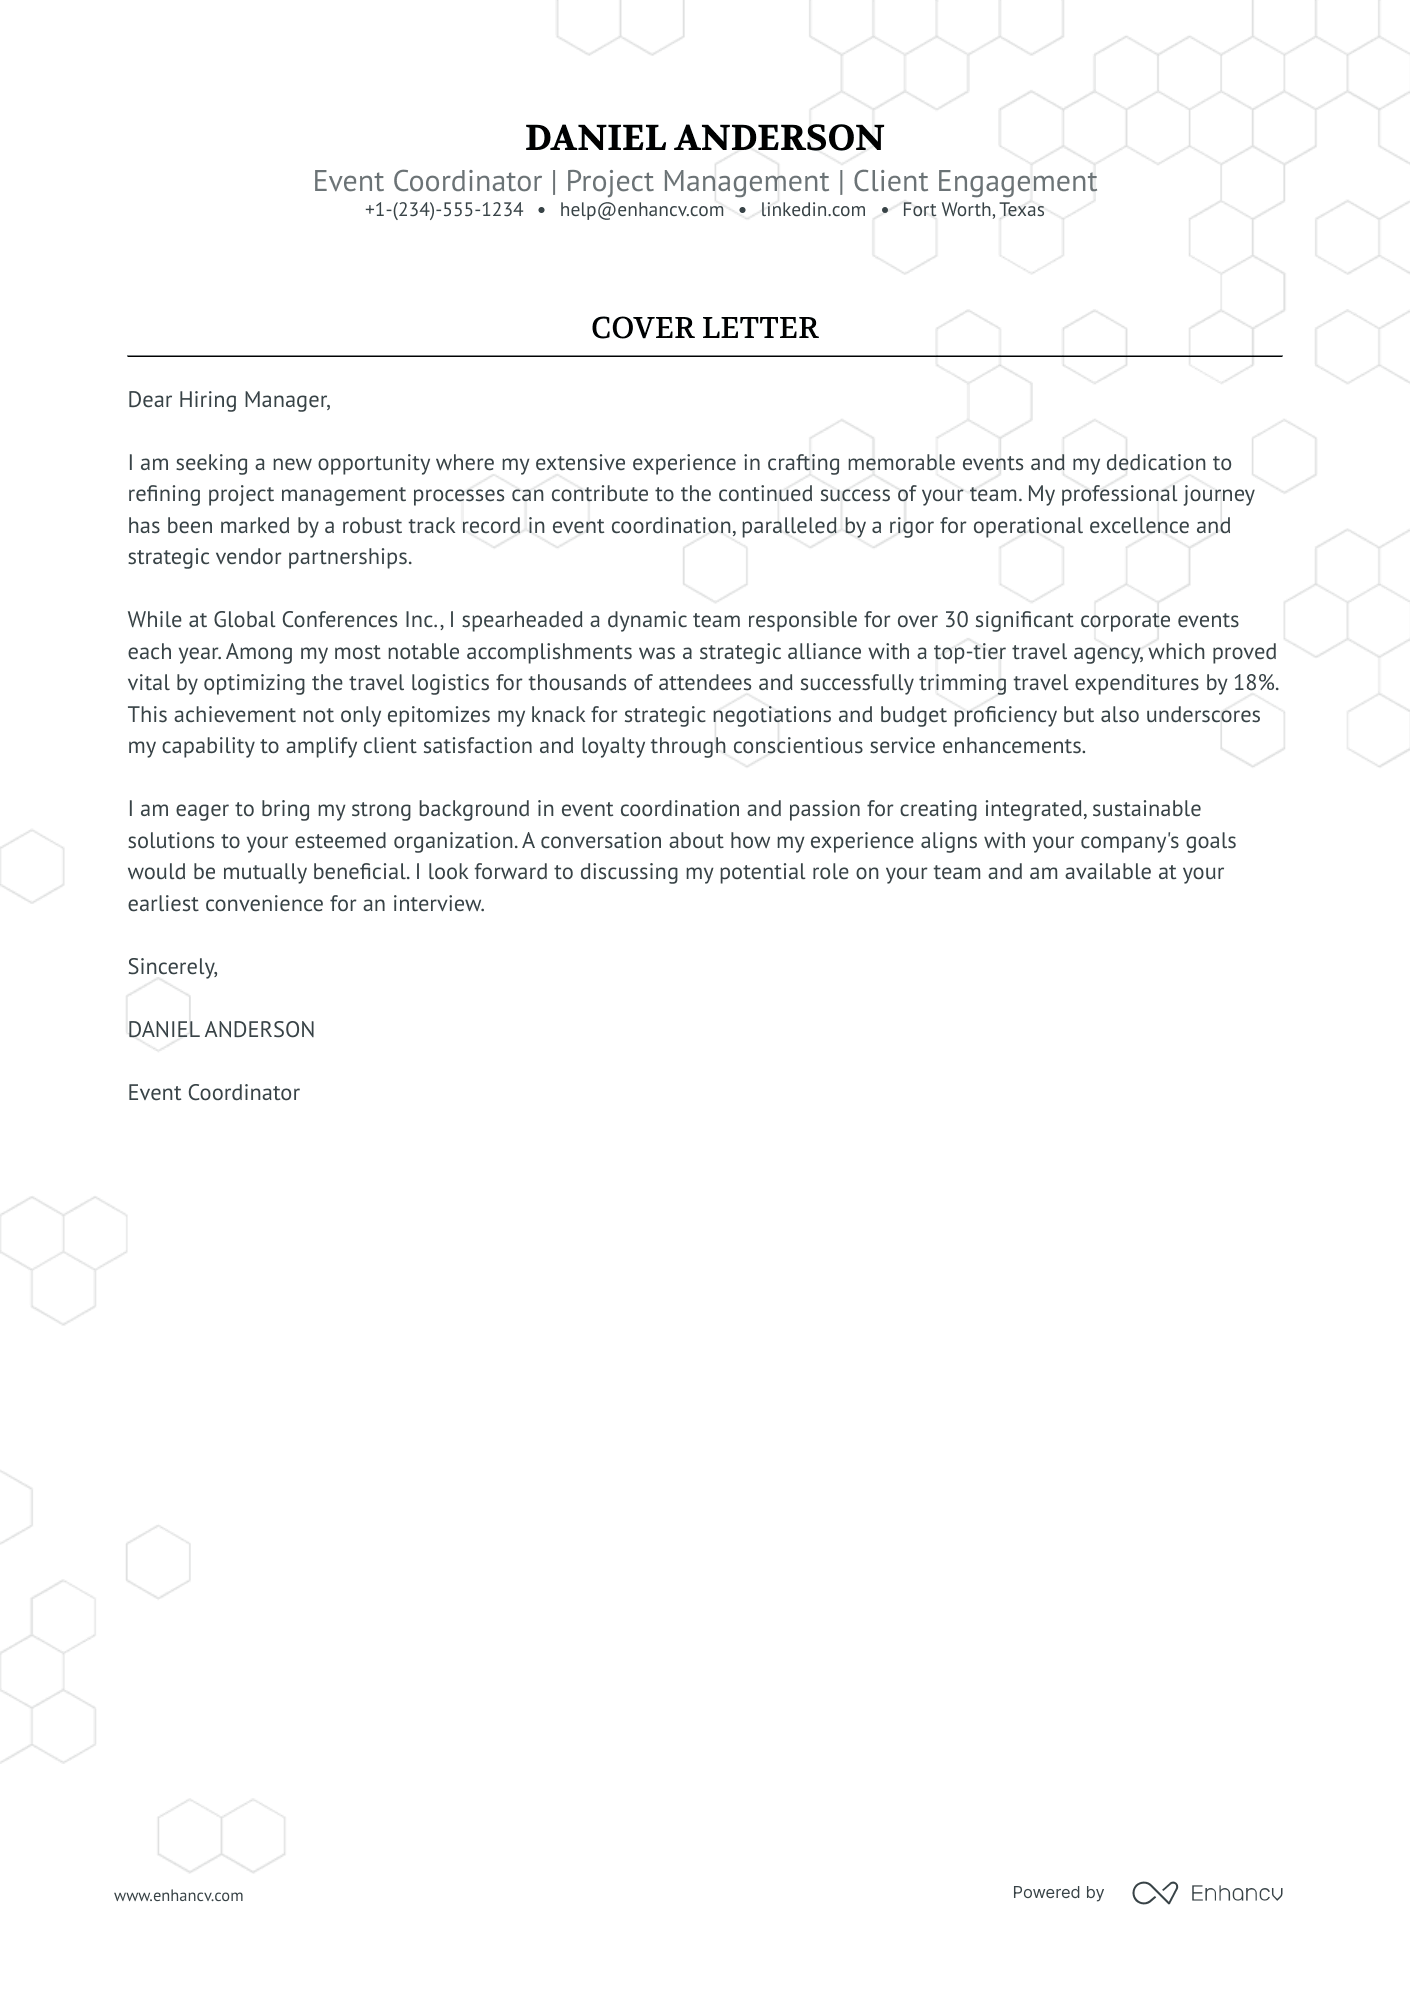 Event Coordinator cover letter